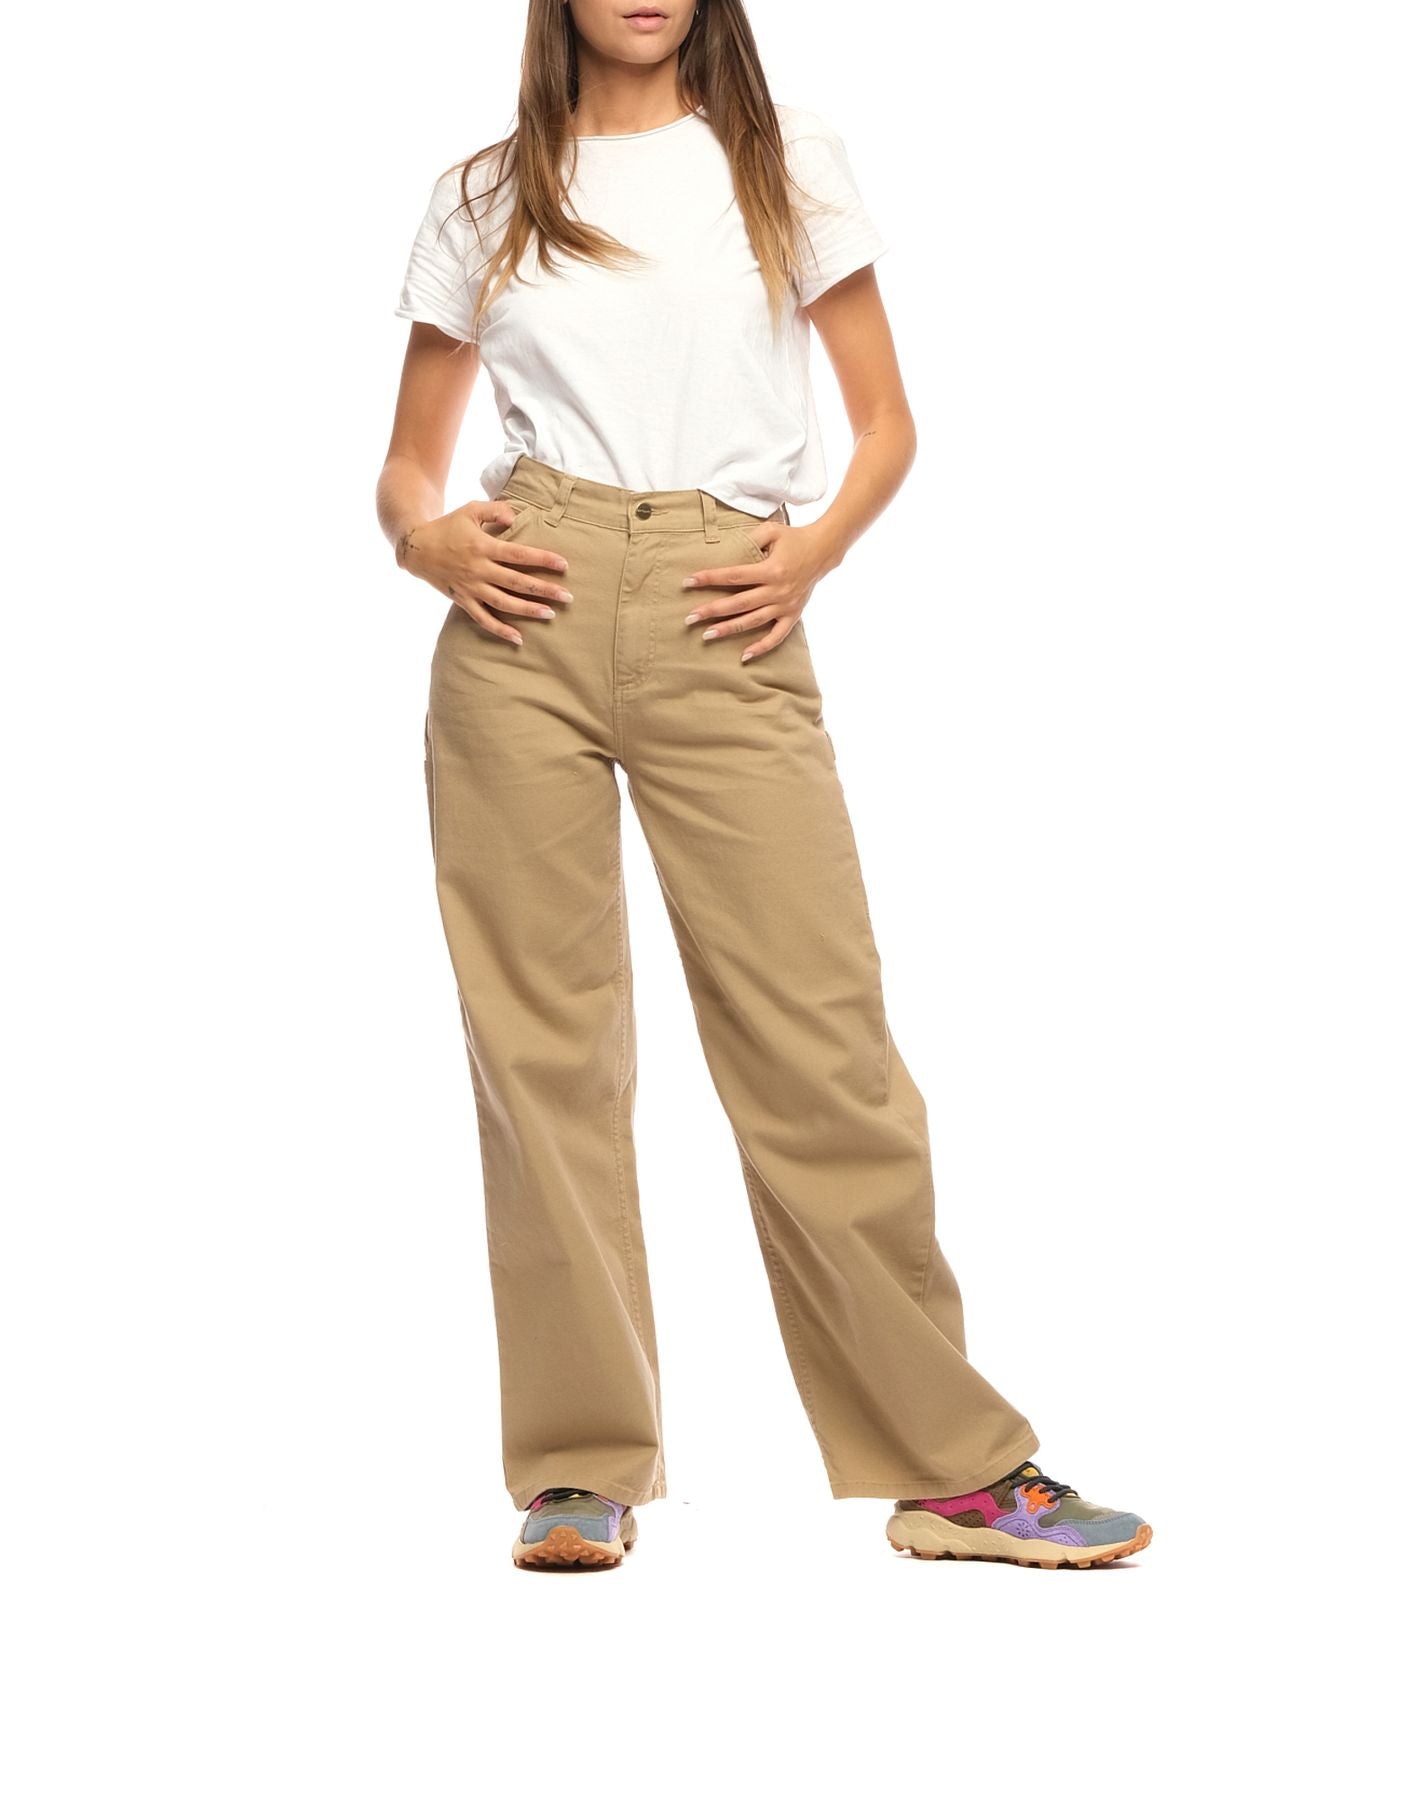 Pants for woman I032257 DUSTY BROWN CARHARTT WIP